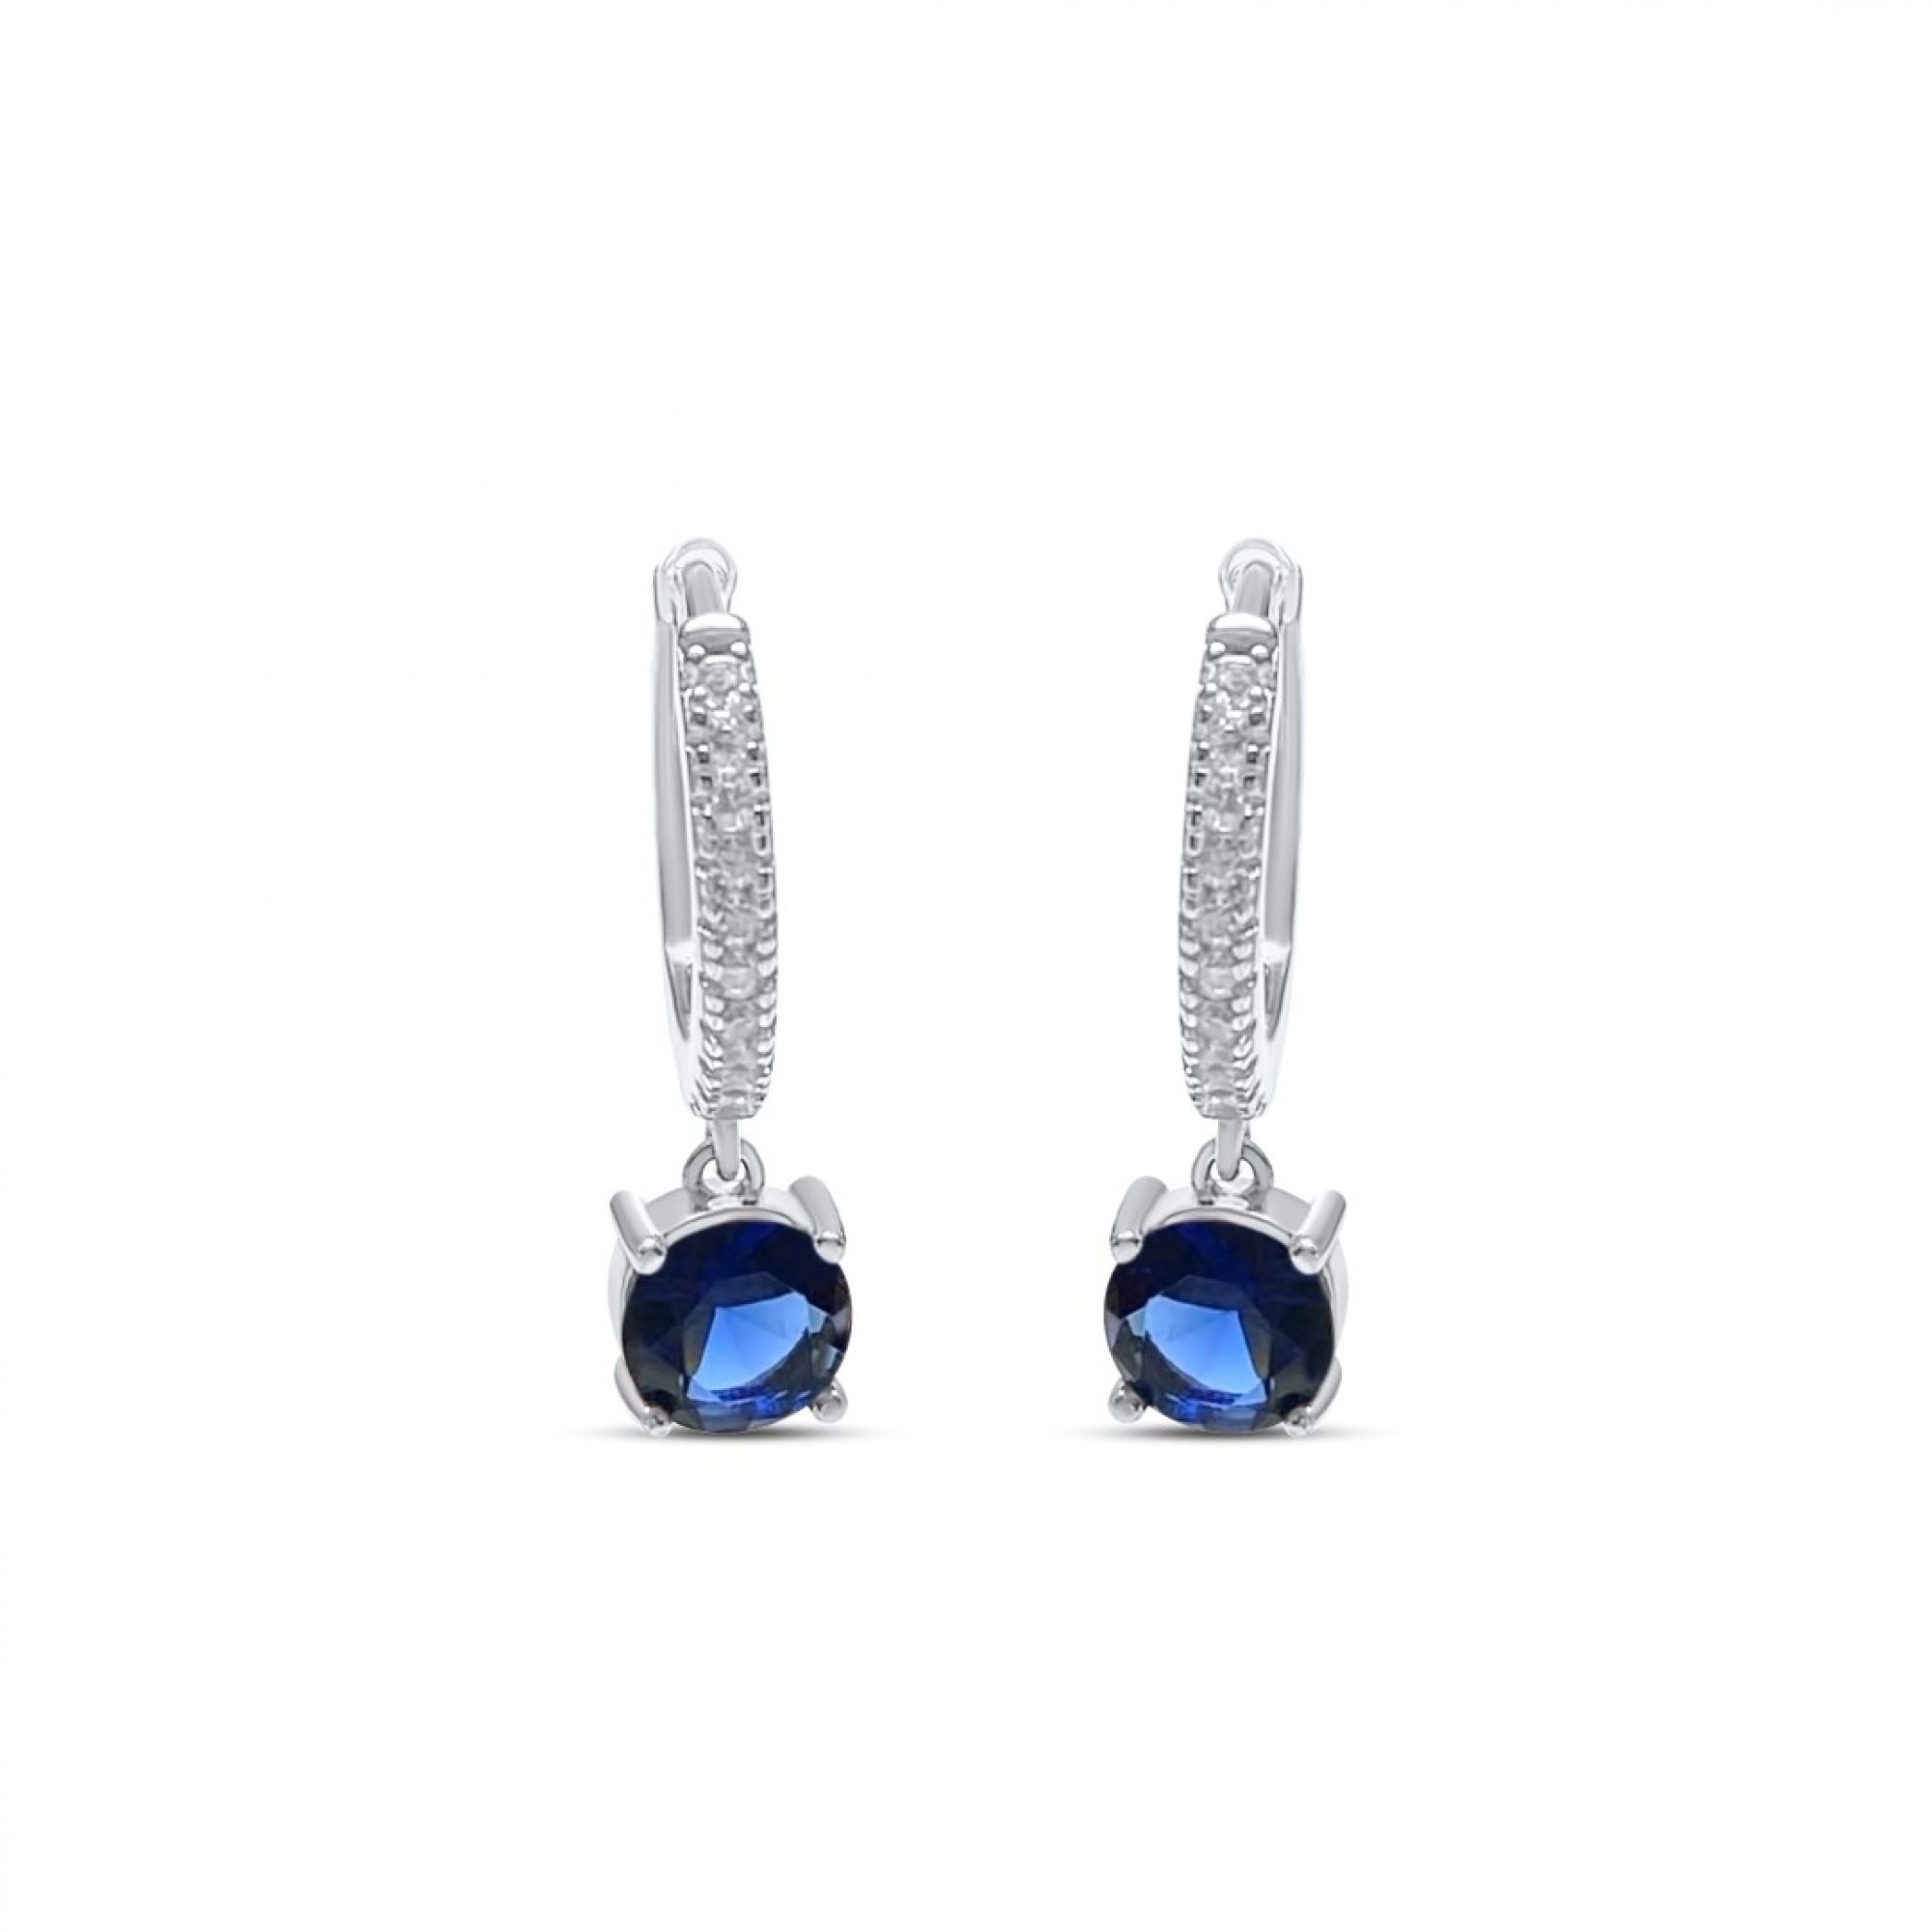 Silver earrings with sapphire and zircon stones